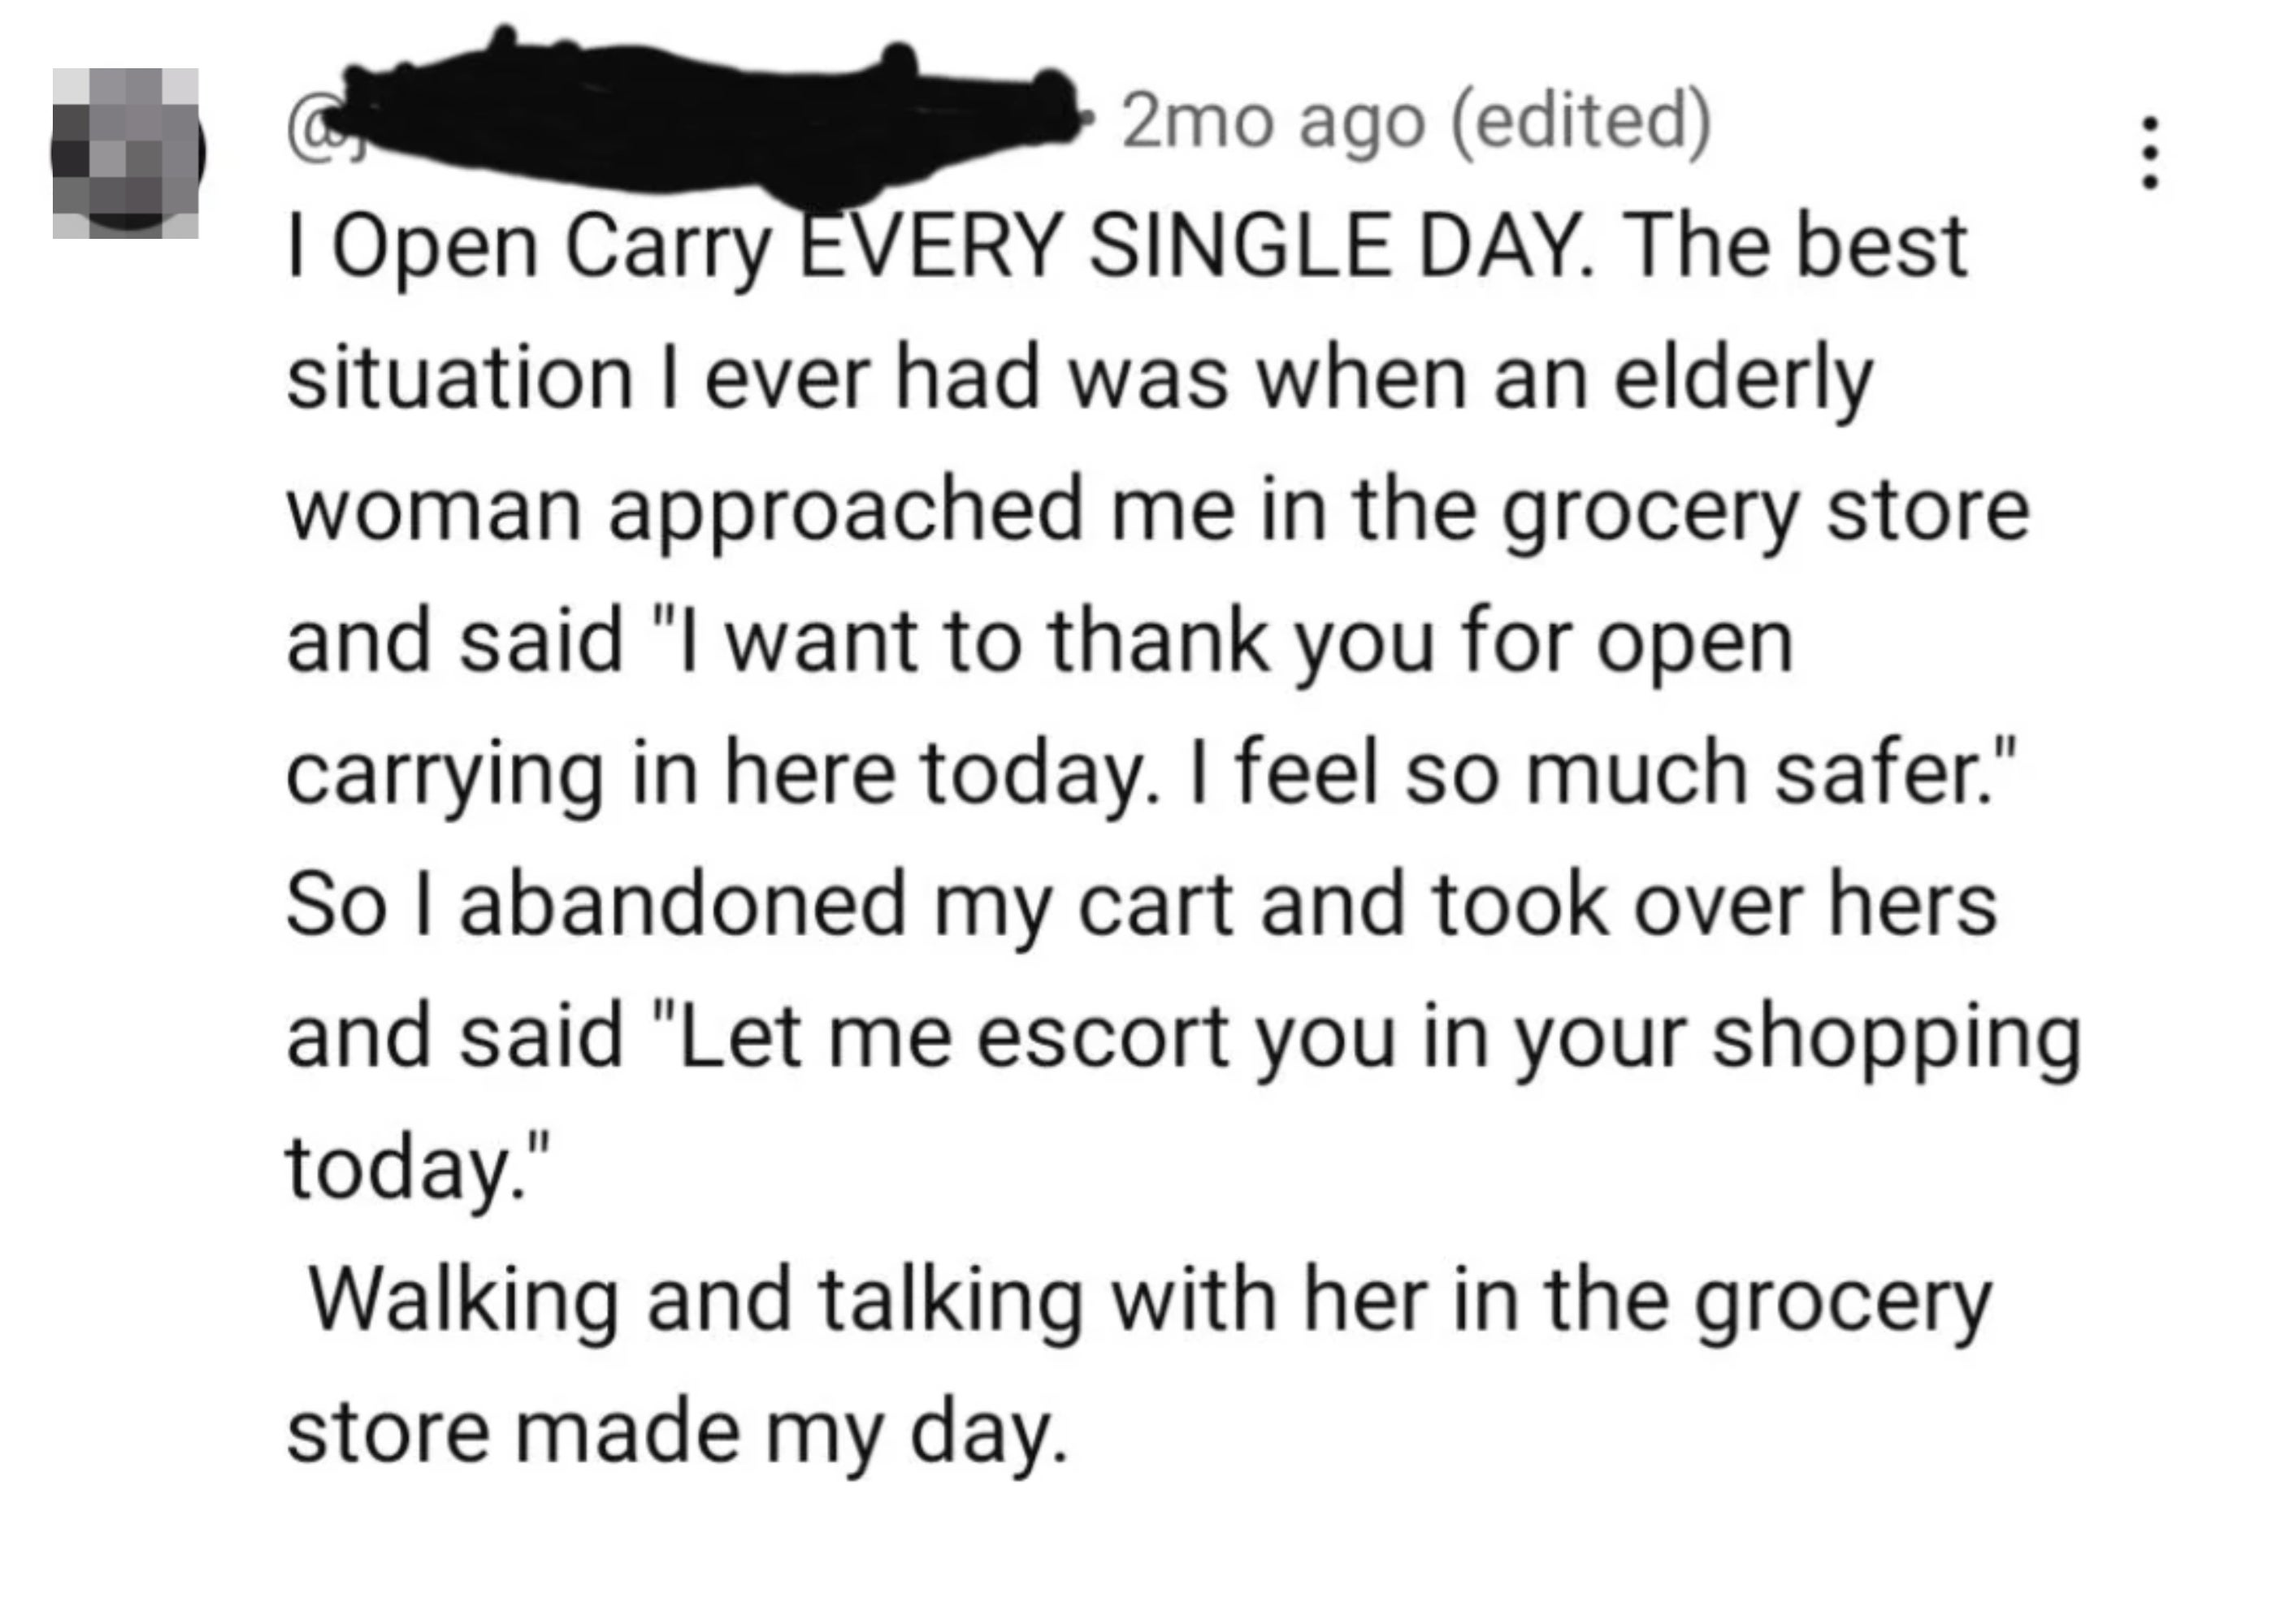 Man who says he &quot;open carries&quot; every day was approached in a grocery store by an elderly woman who thanked him for open carrying and she feels &quot;so much safer,&quot; so he abandoned his cart for hers so he could escort her and it made his day